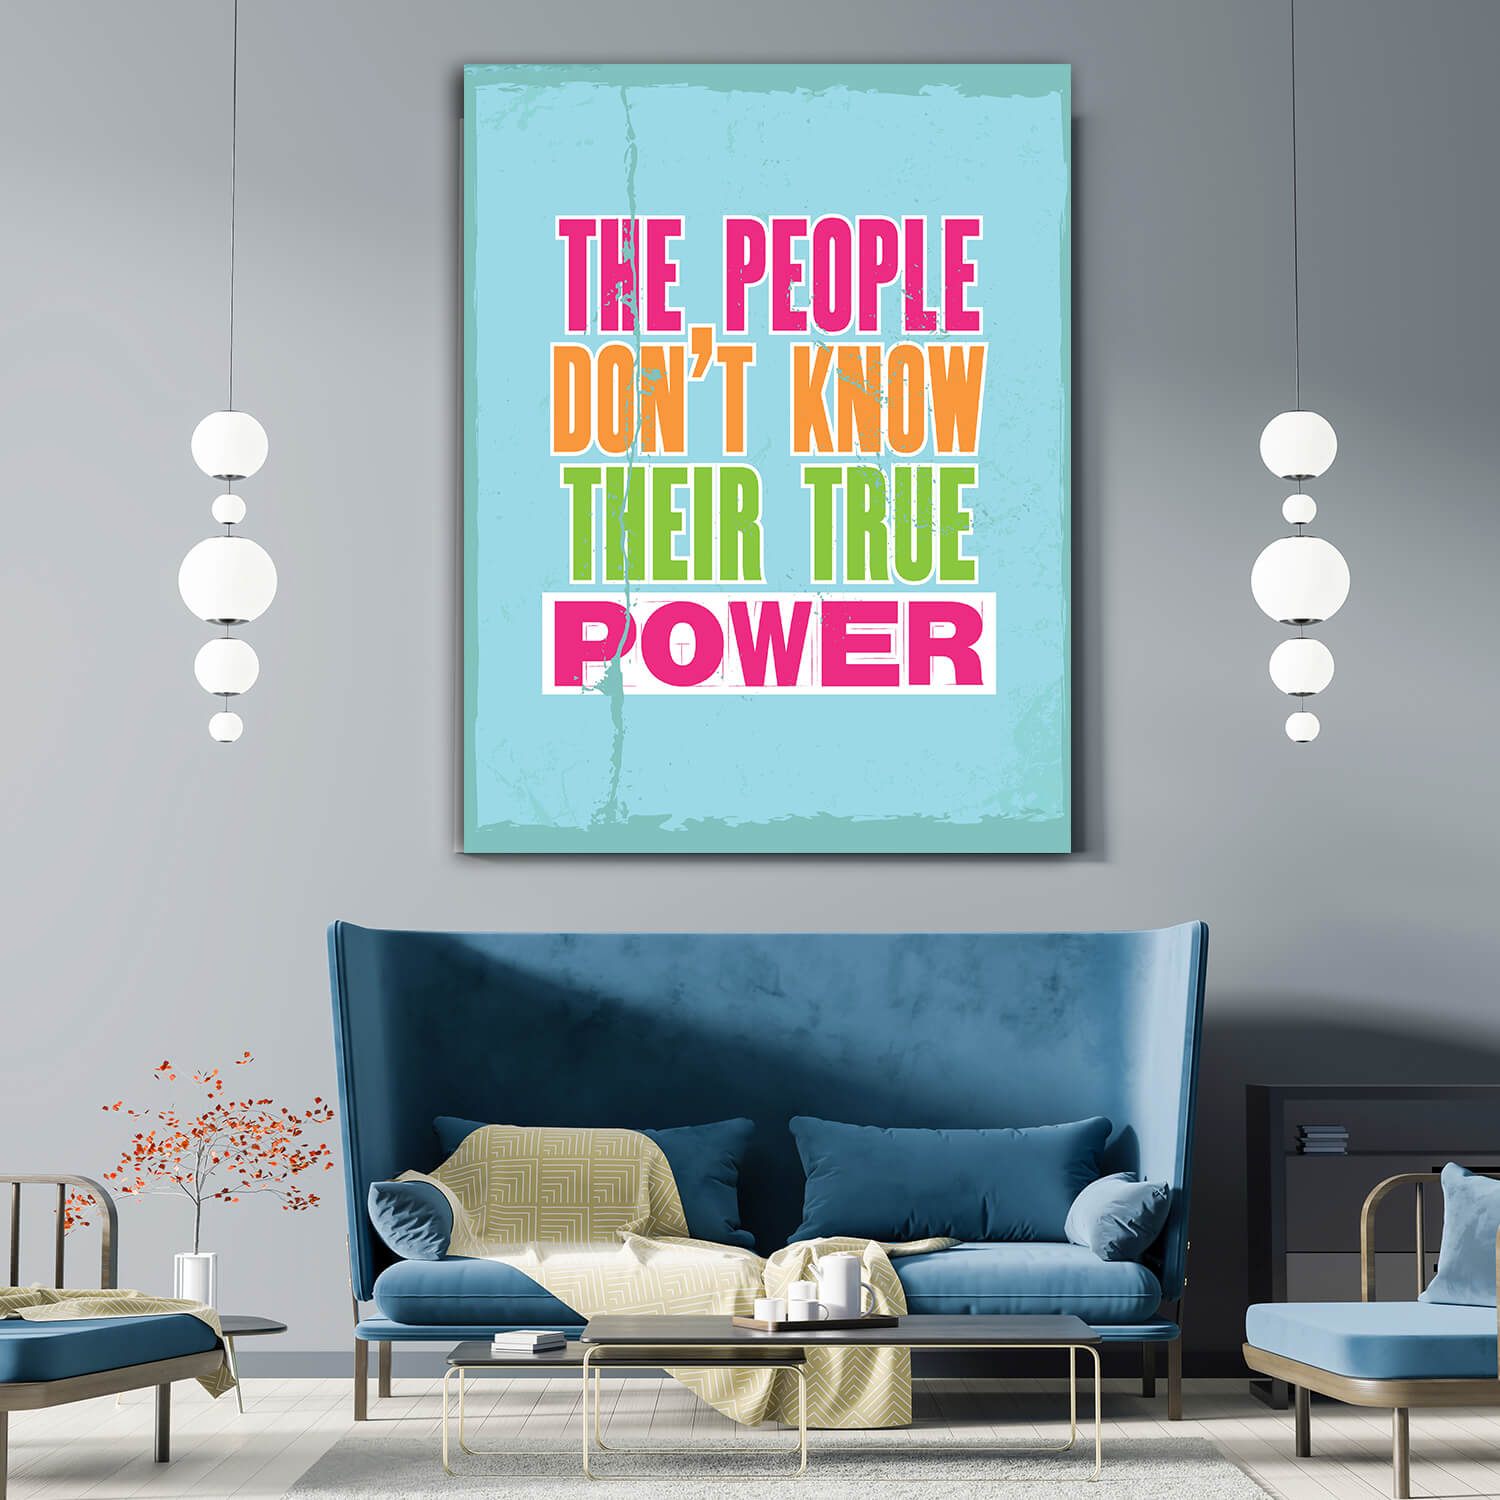 W1_0022_M&P_0010_ML_0025_32765780_THE PEOPLE DO NOT KNOW THEIR TRUE POWER Motivation Quote AOA10826